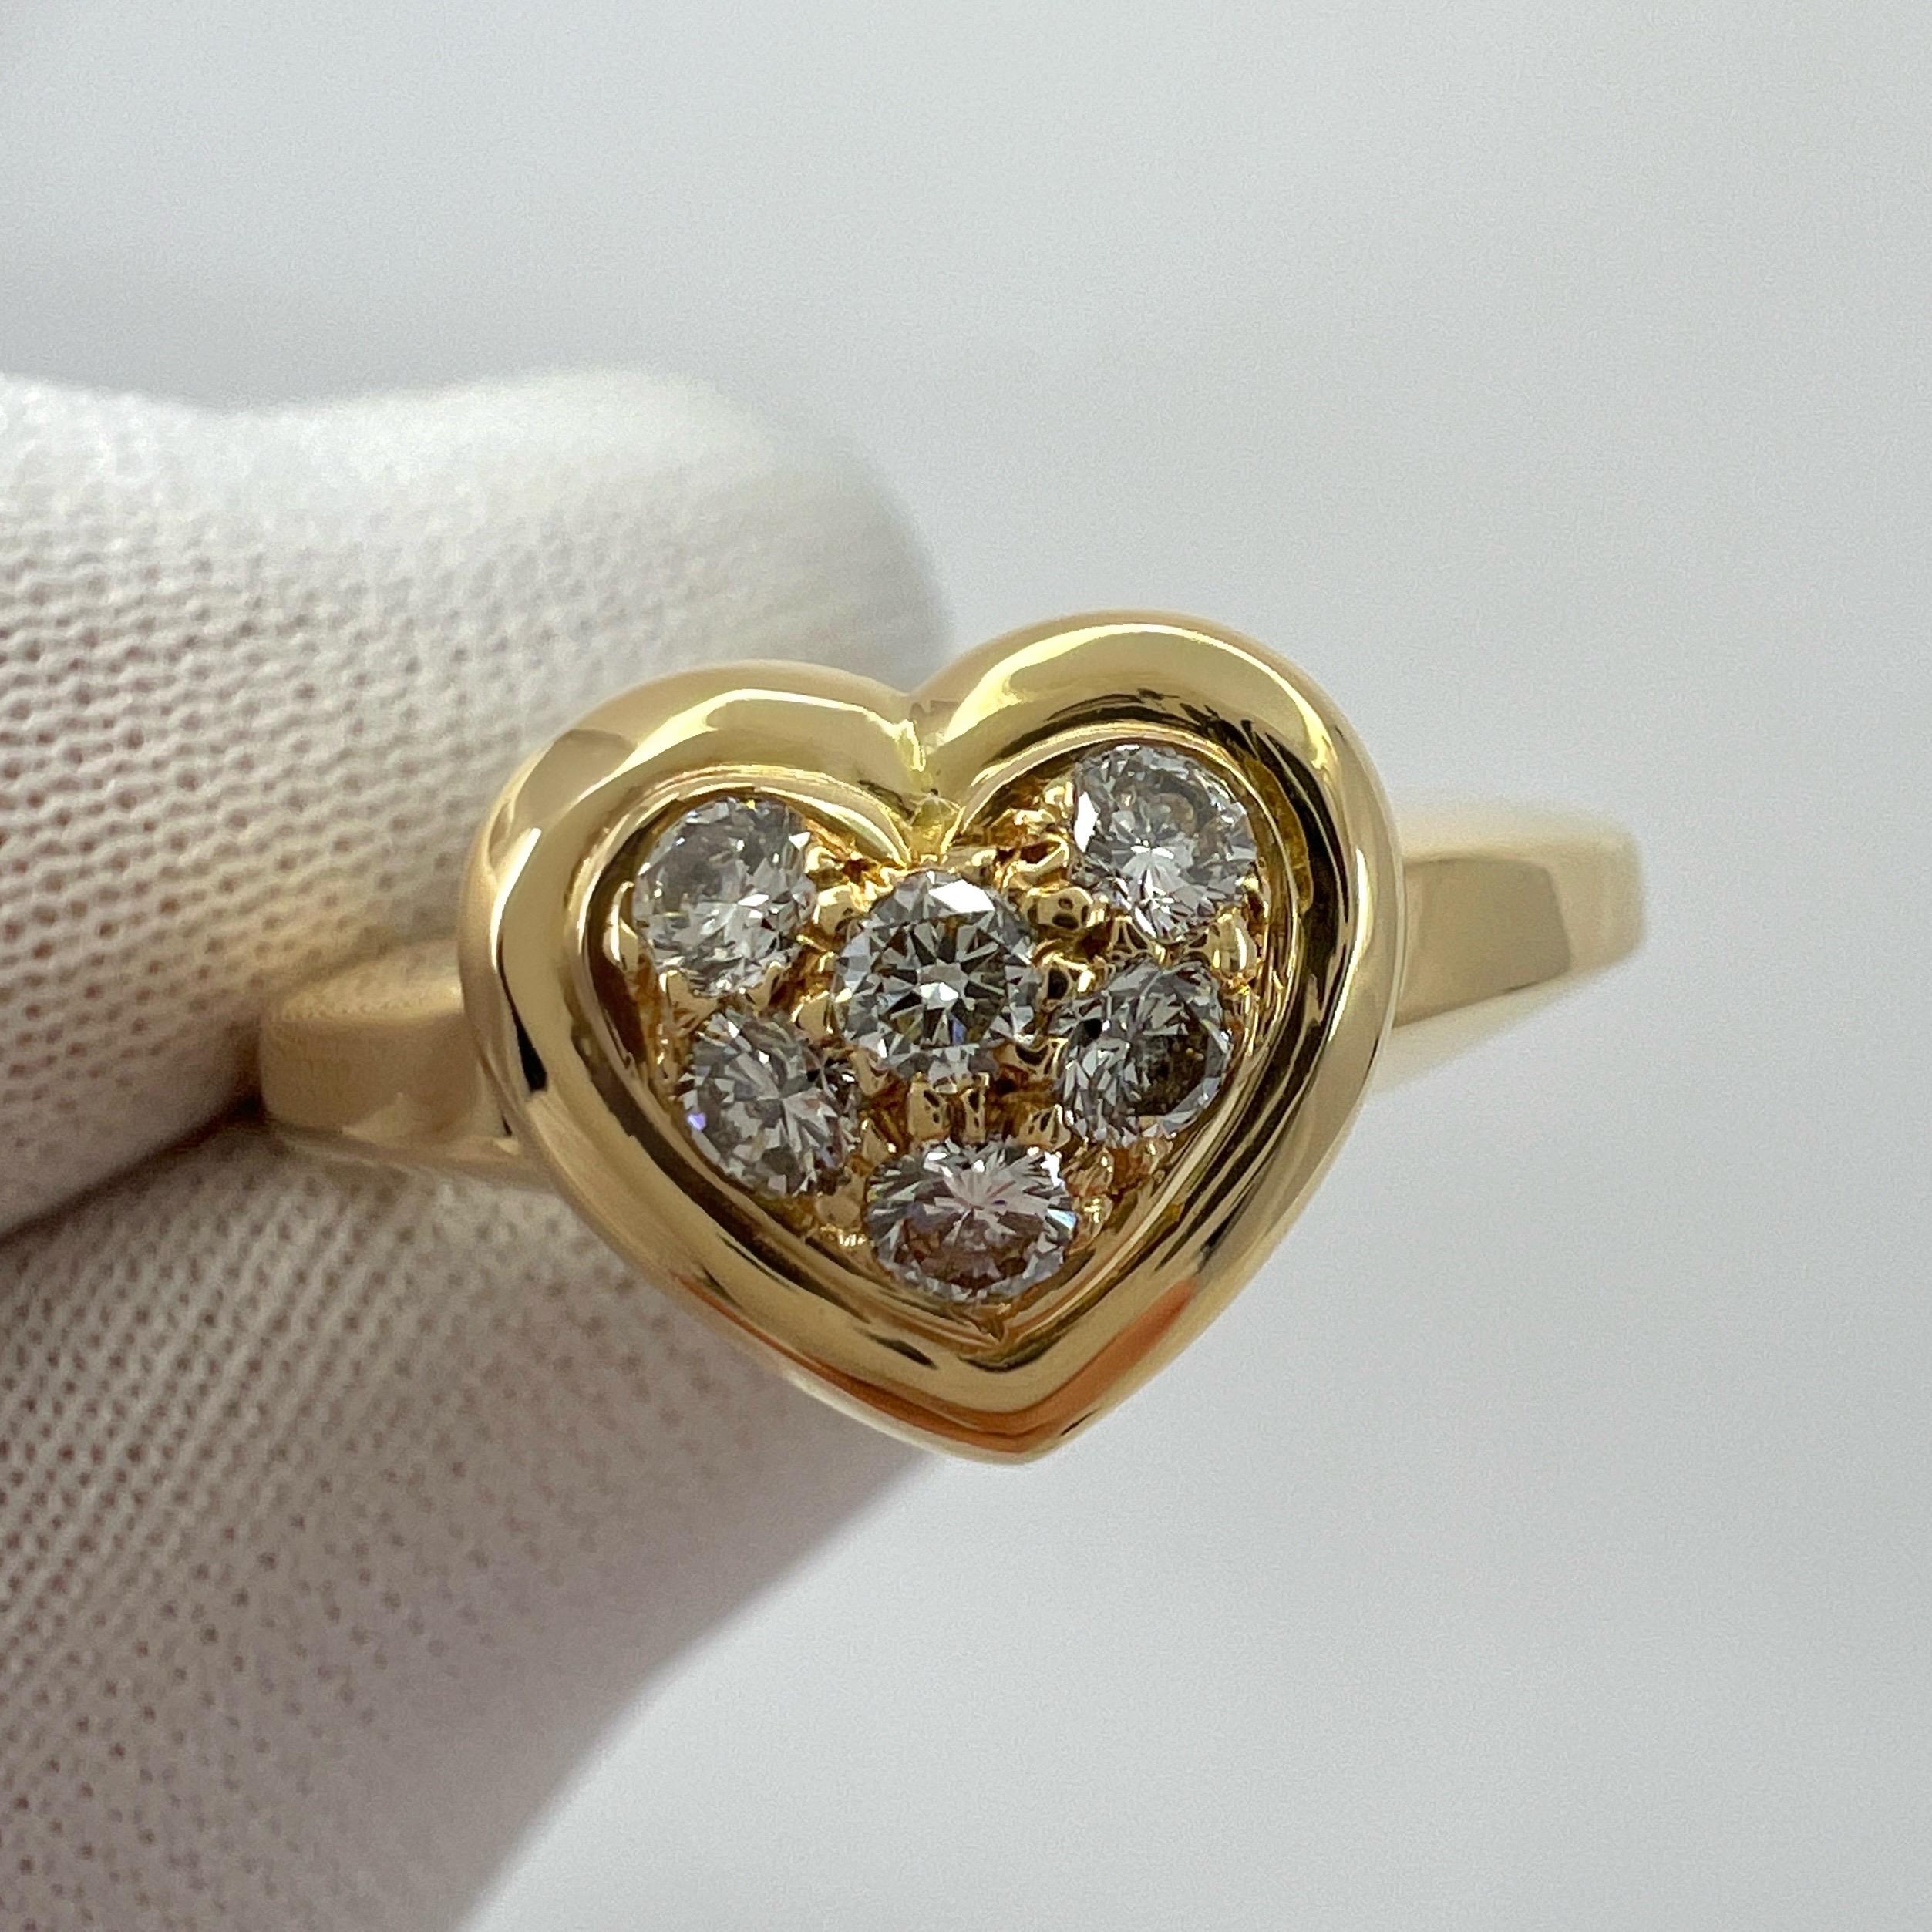 Rare Vintage Van Cleef & Arpels 18k Yellow Gold Diamond Heart Ring And Pendant For Sale 2